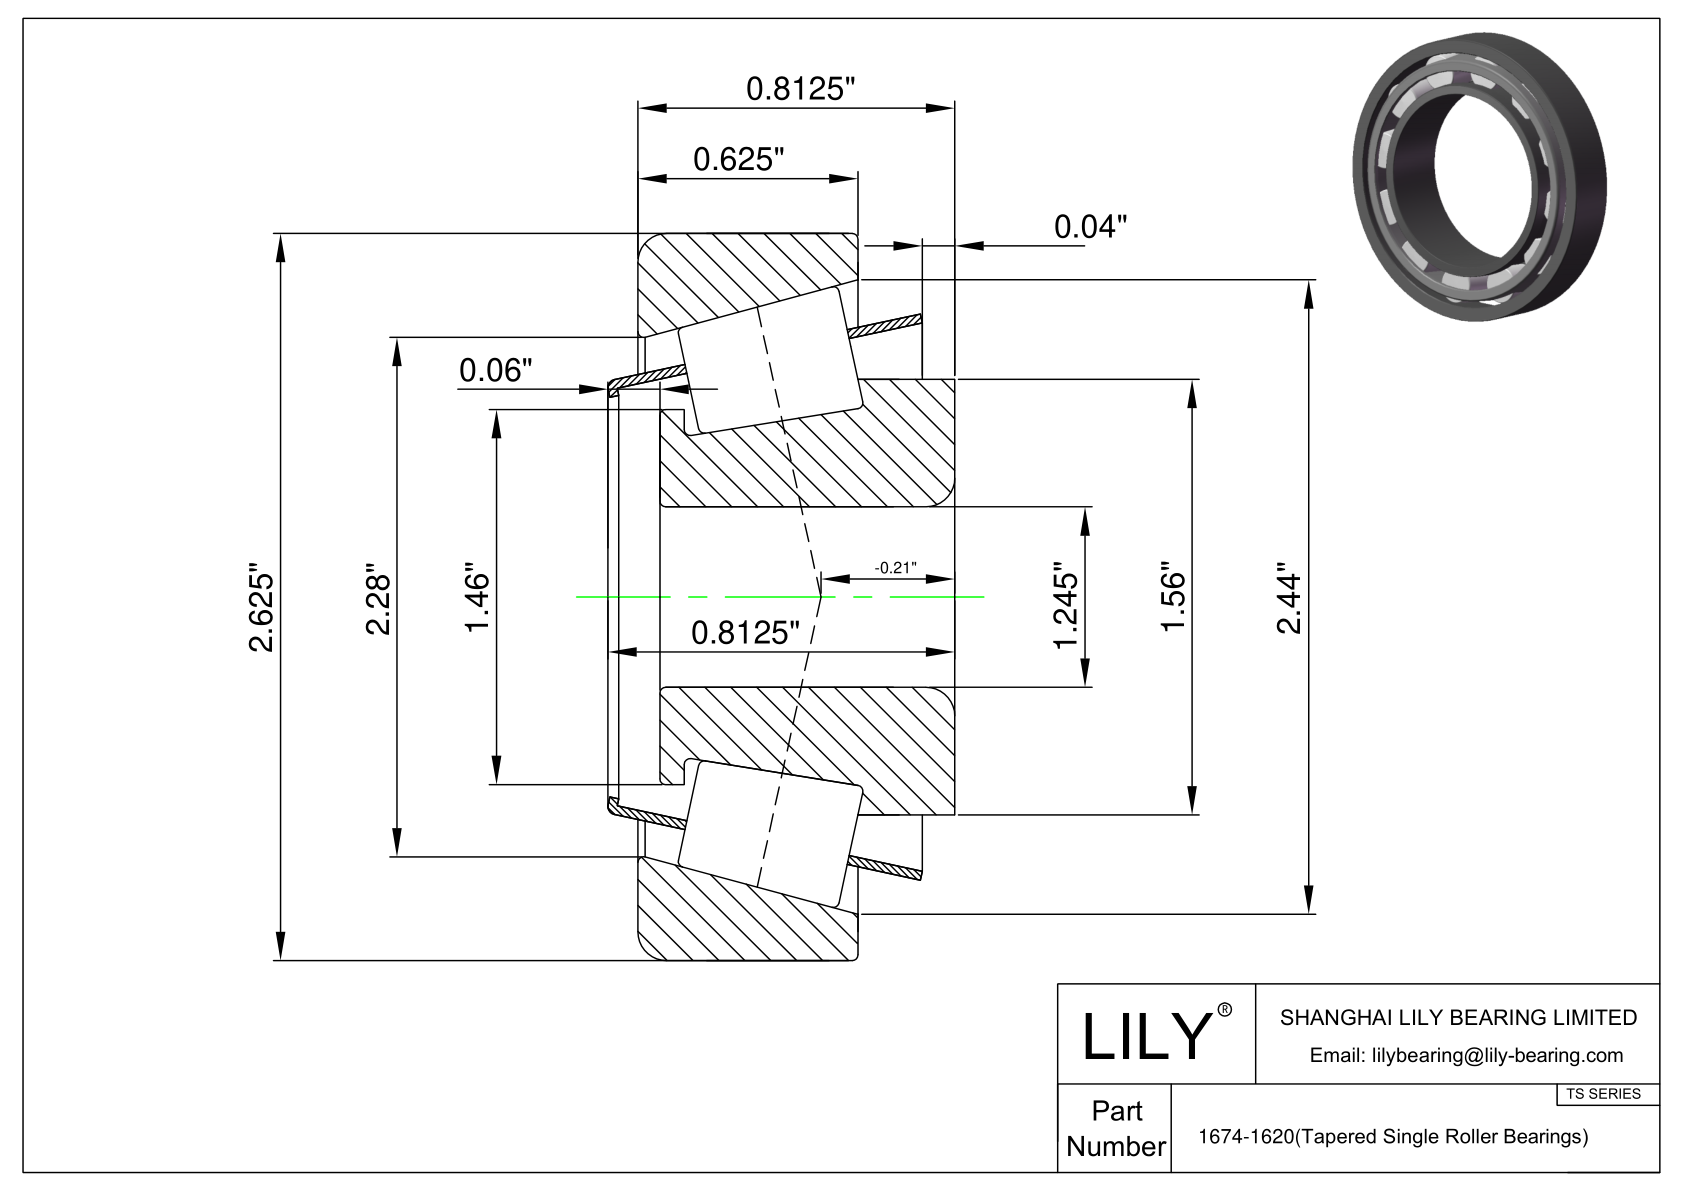 1674-1620 TS (Tapered Single Roller Bearings) (Imperial) cad drawing